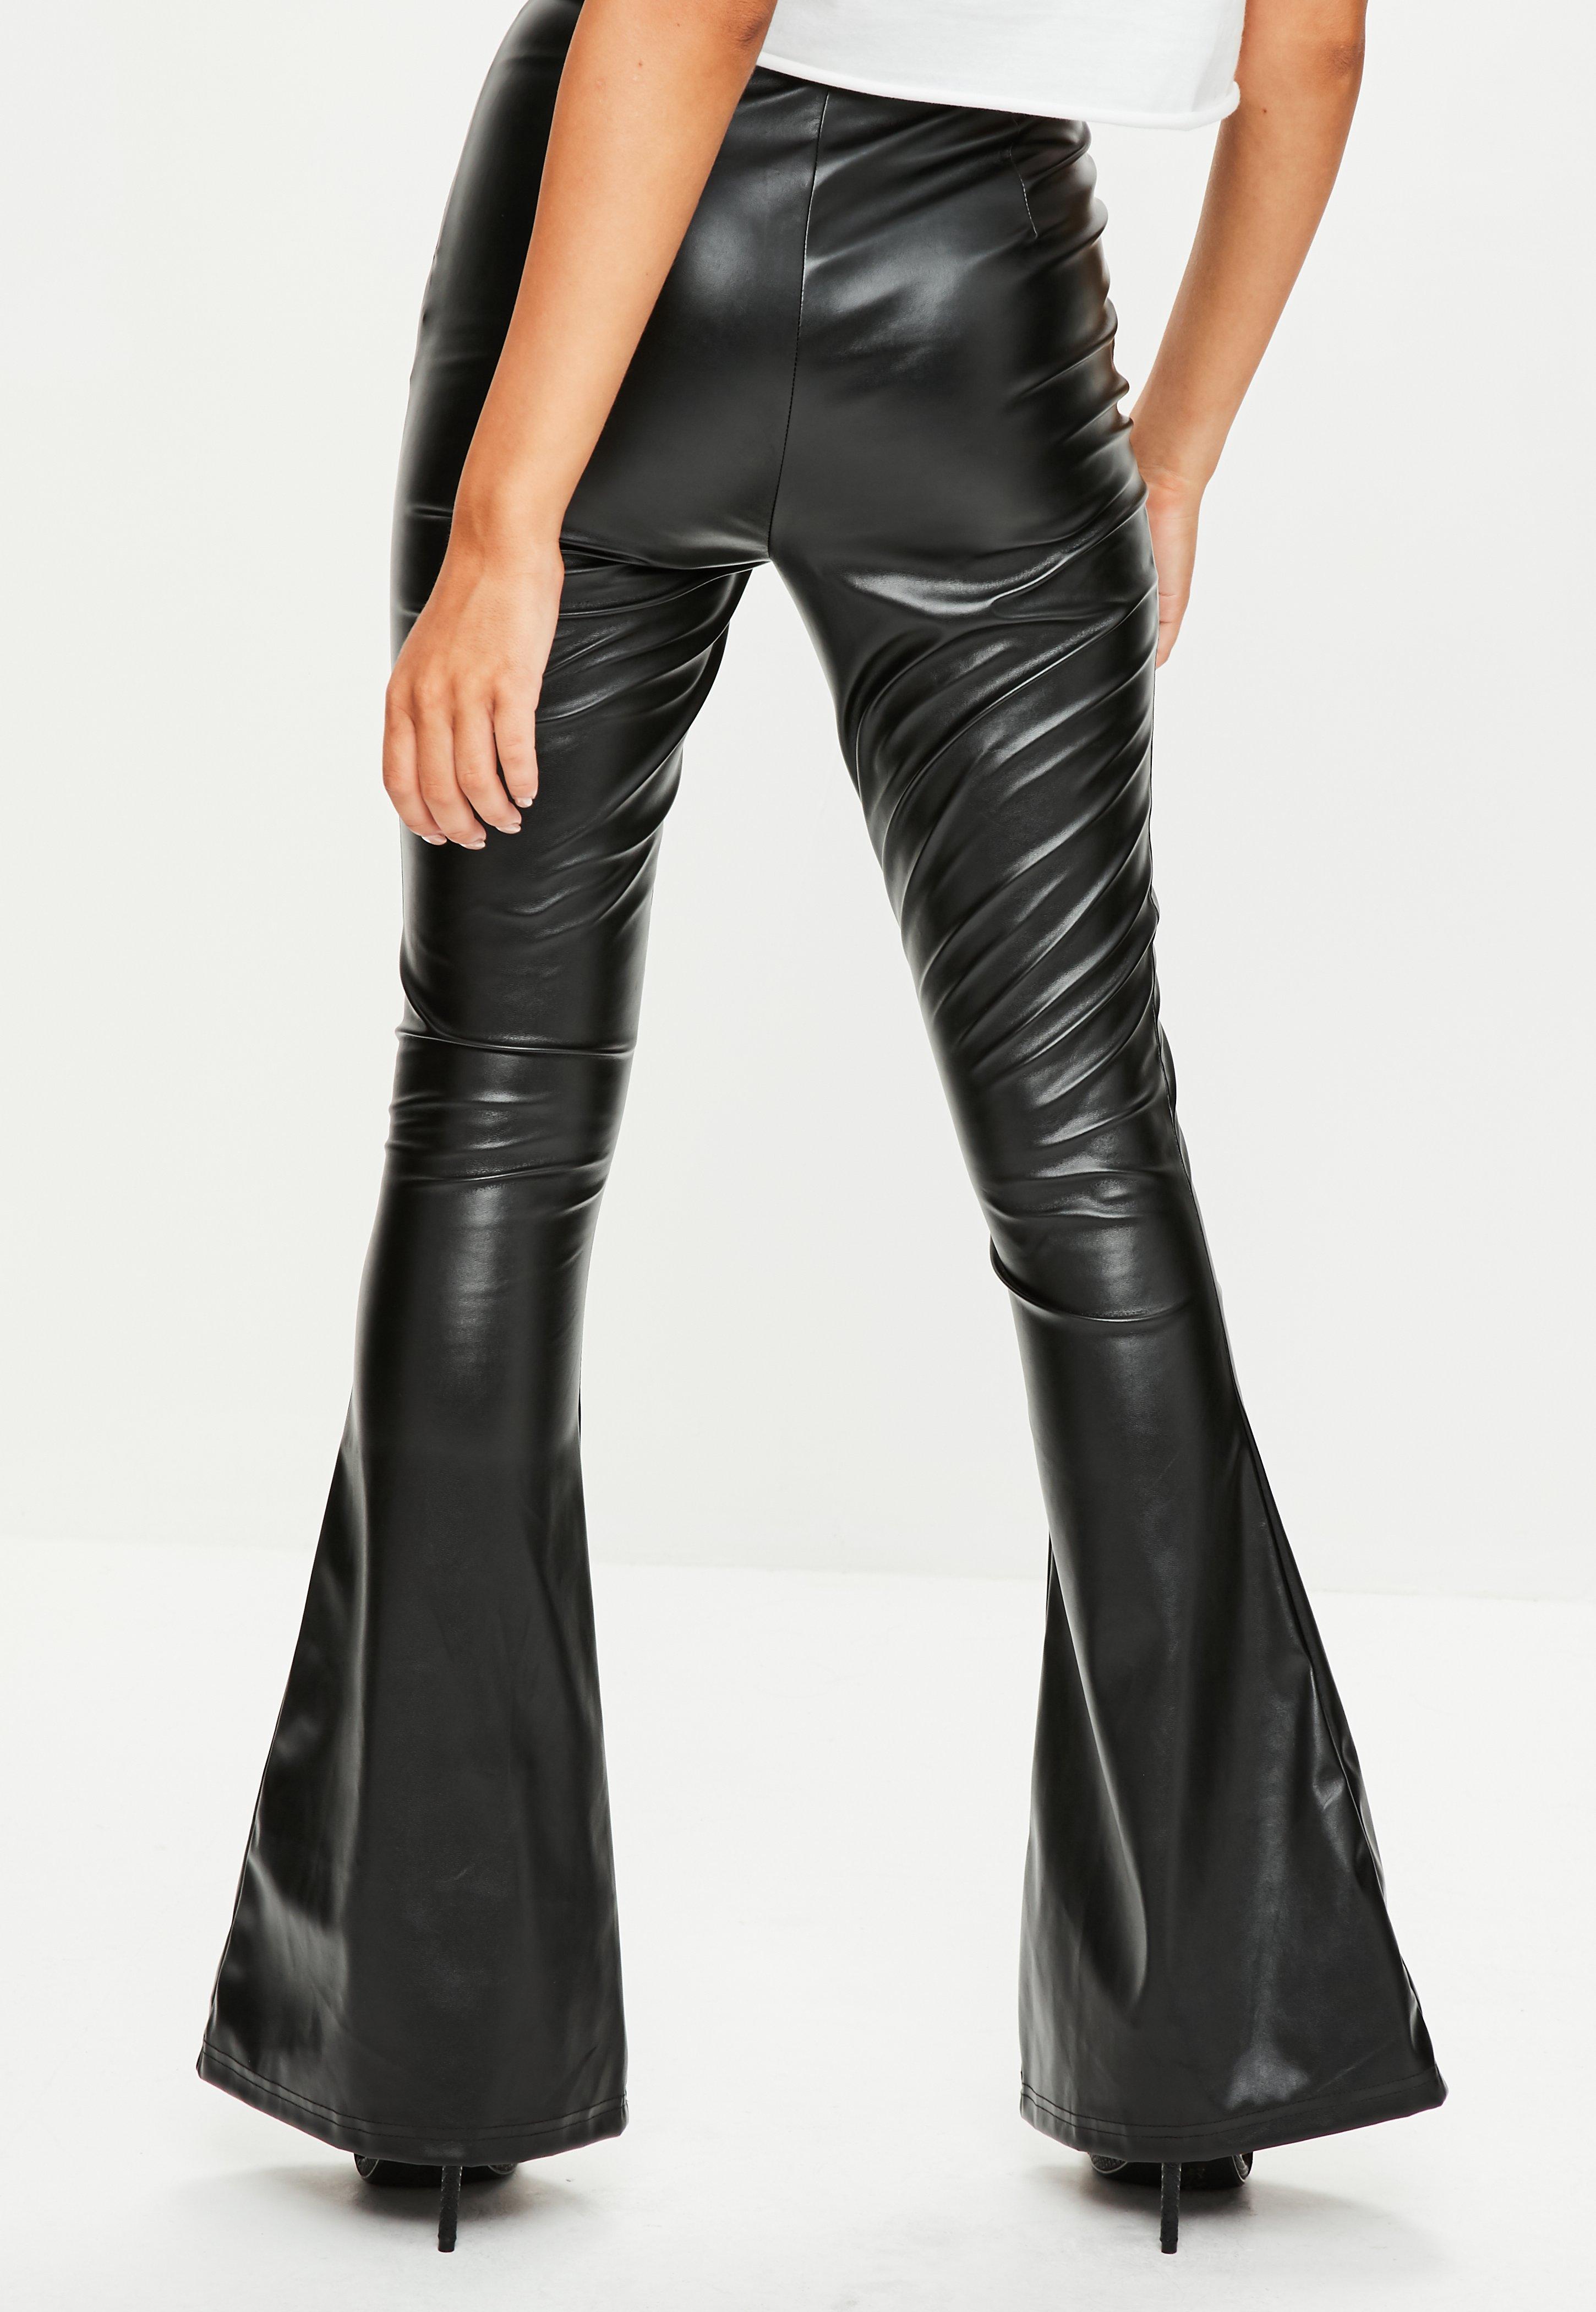 Missguided Black Lace Up Faux Leather Trousers - Lyst